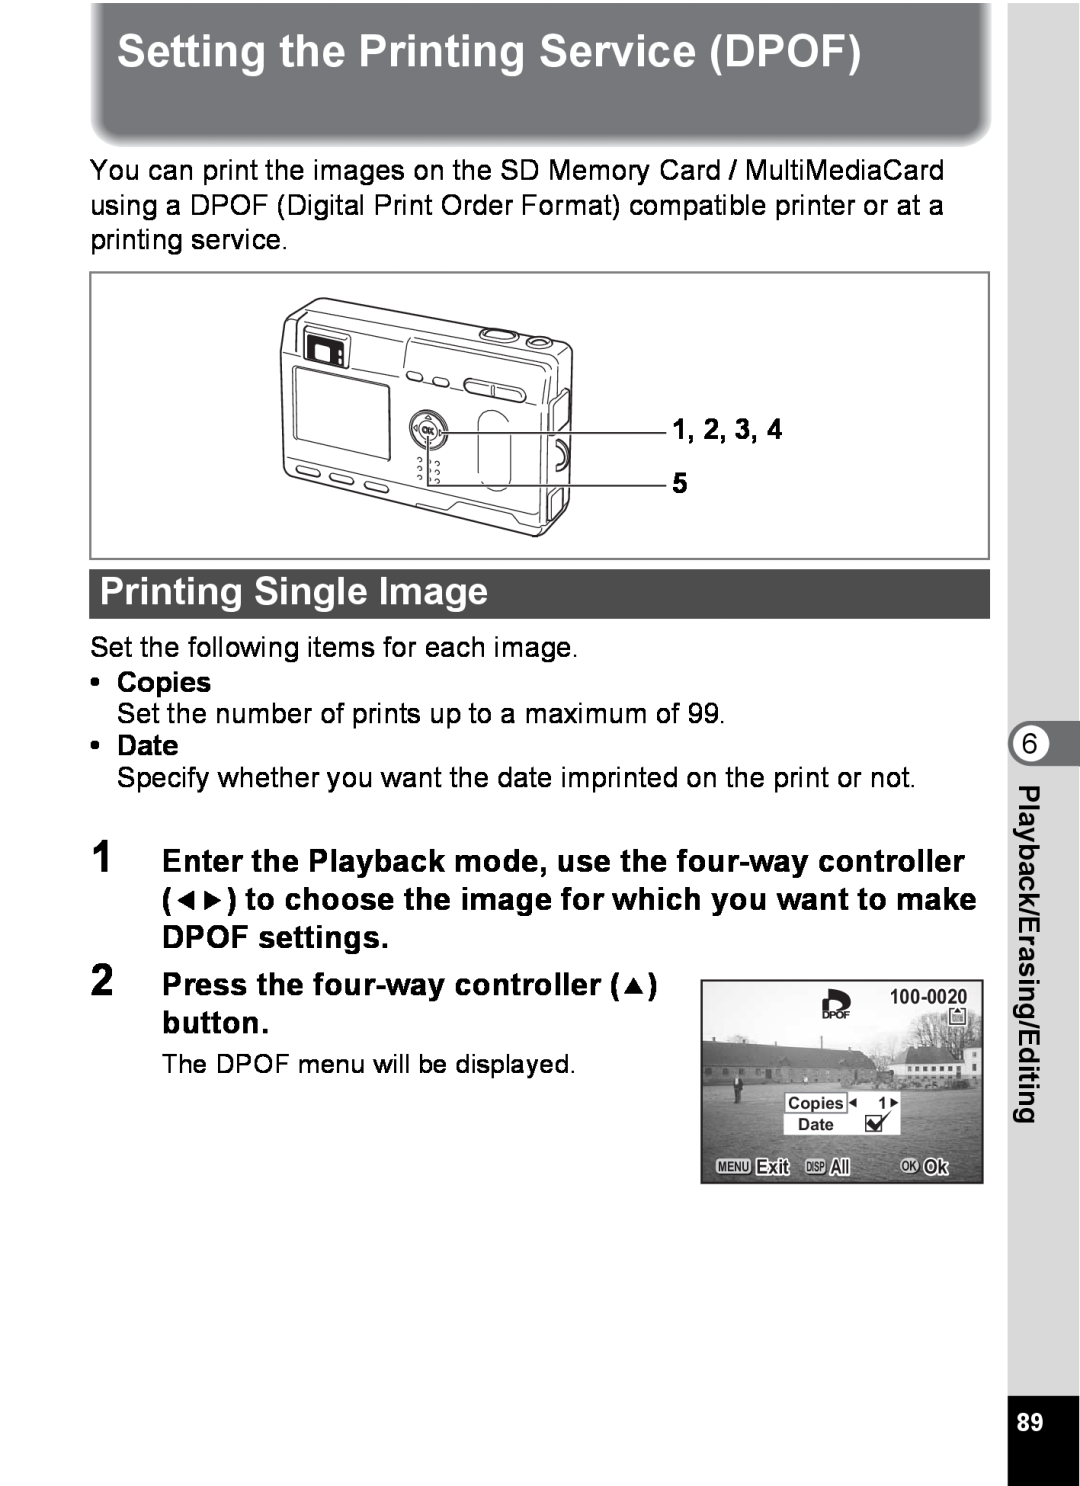 Pentax S4 Setting the Printing Service DPOF, Printing Single Image, Press the four-way controller 2 button, Copies, Date 